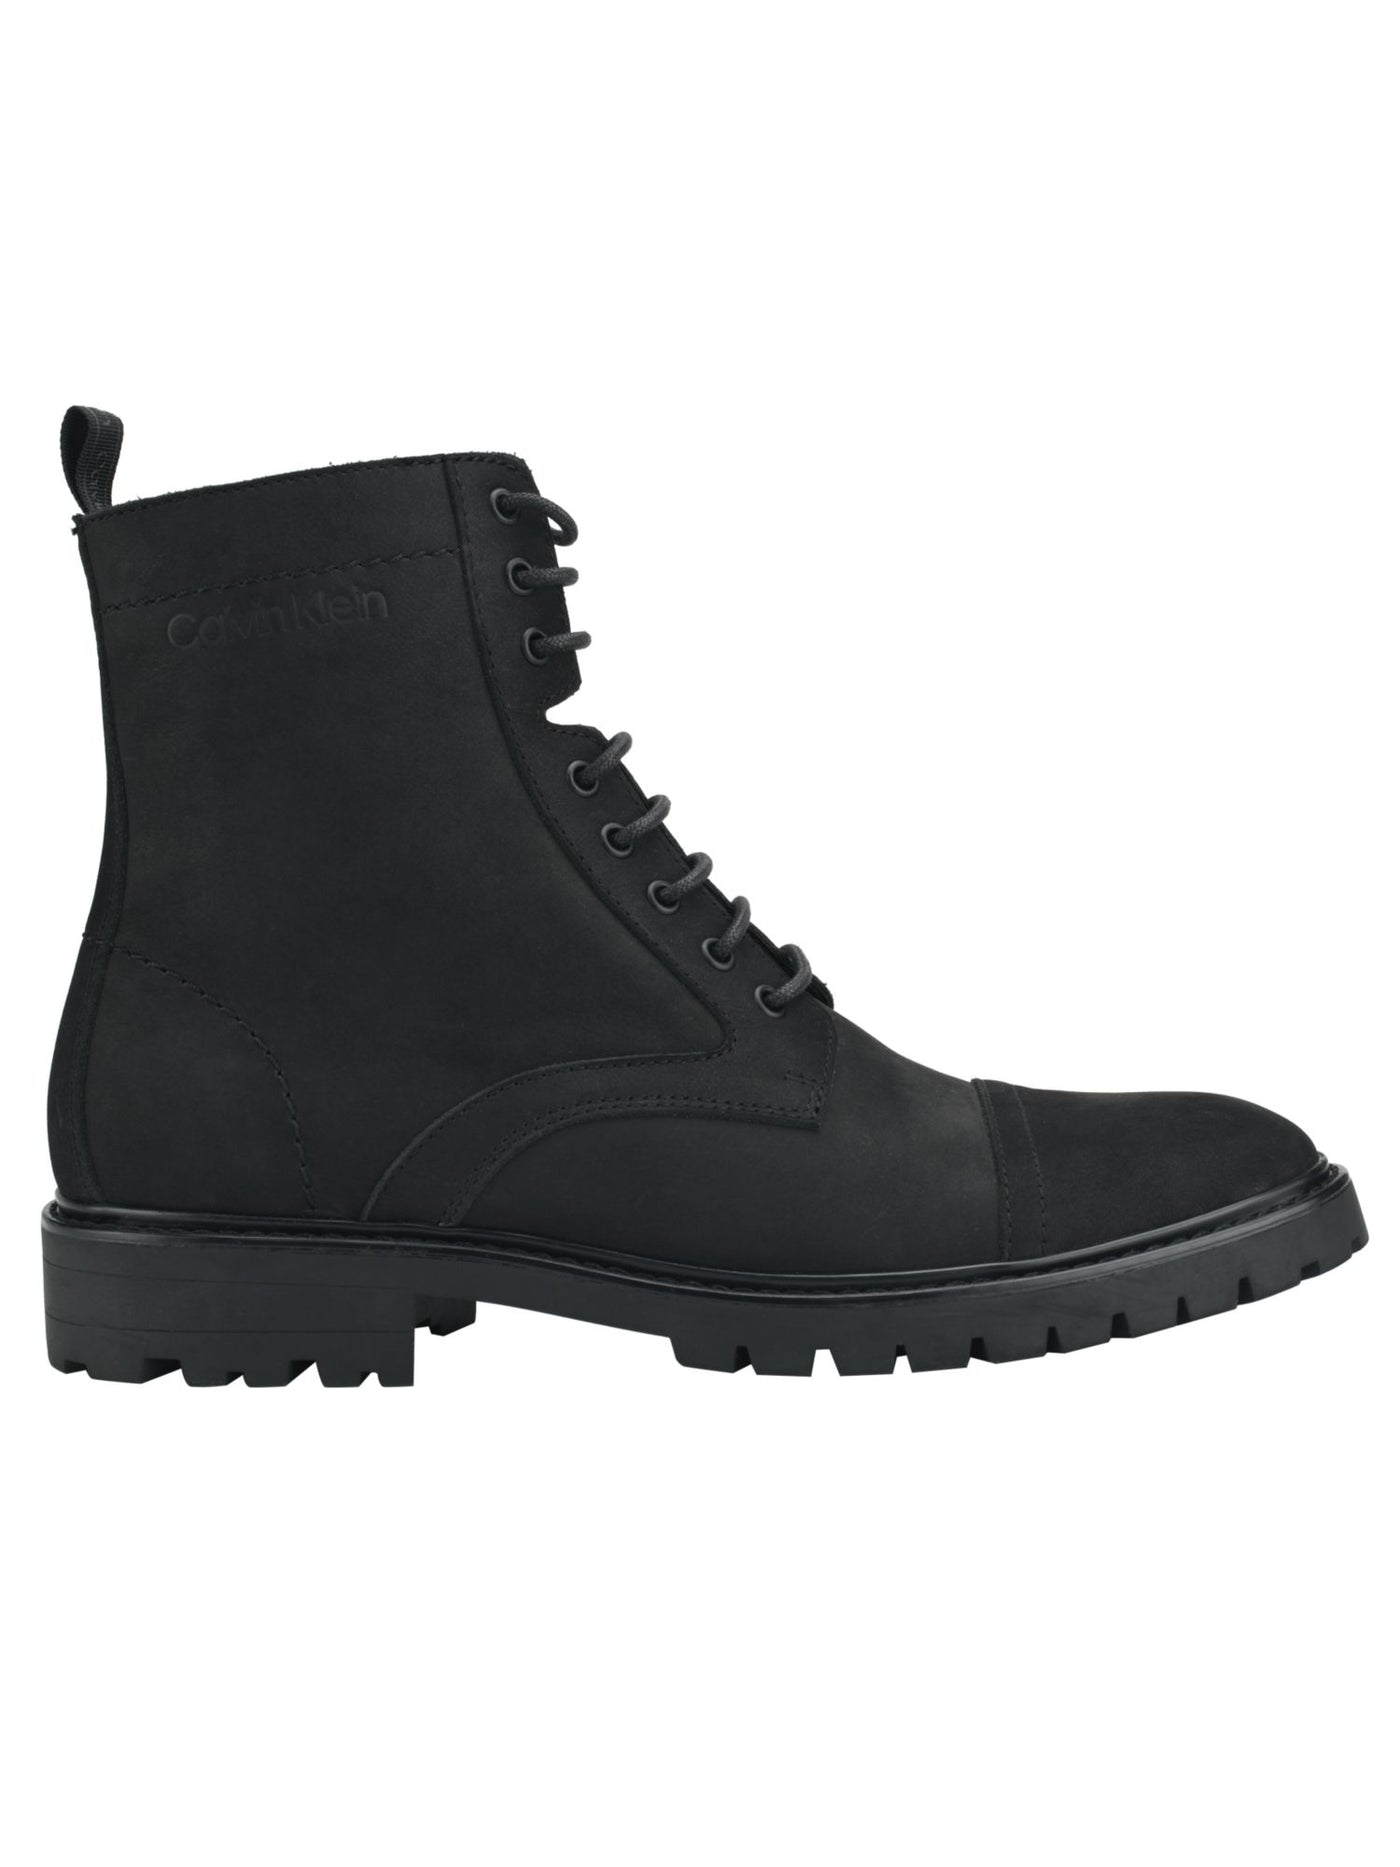 CALVIN KLEIN Mens Black Lug Sole Pull Tab Cushioned Removable Insole Lorenzo Round Toe Block Heel Lace-Up Boots Shoes 11